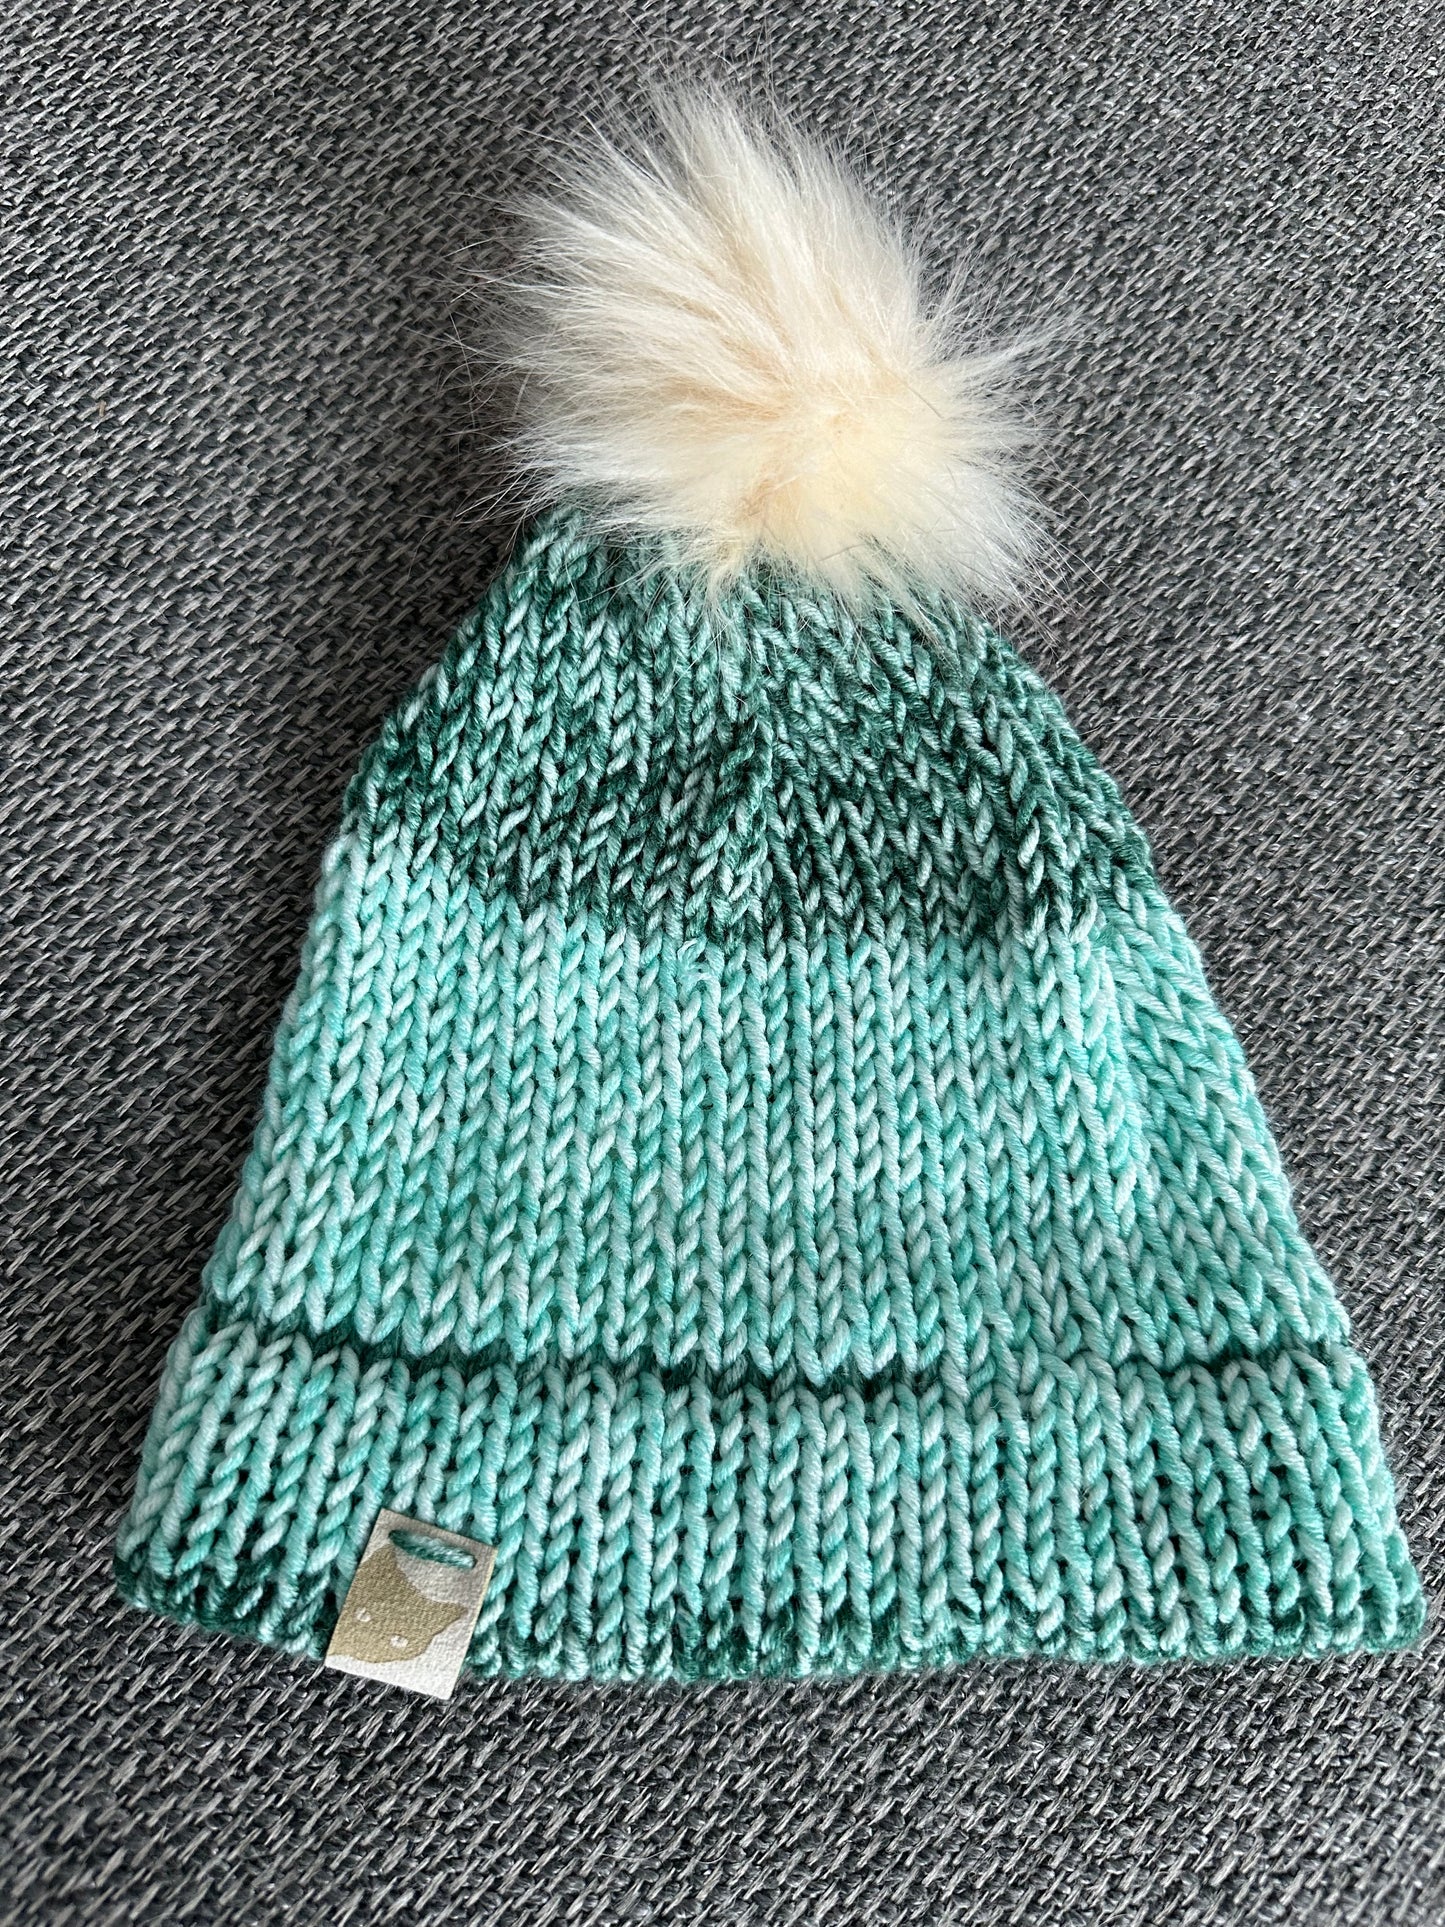 Hand Made Recycled Cotton Hat - Greens